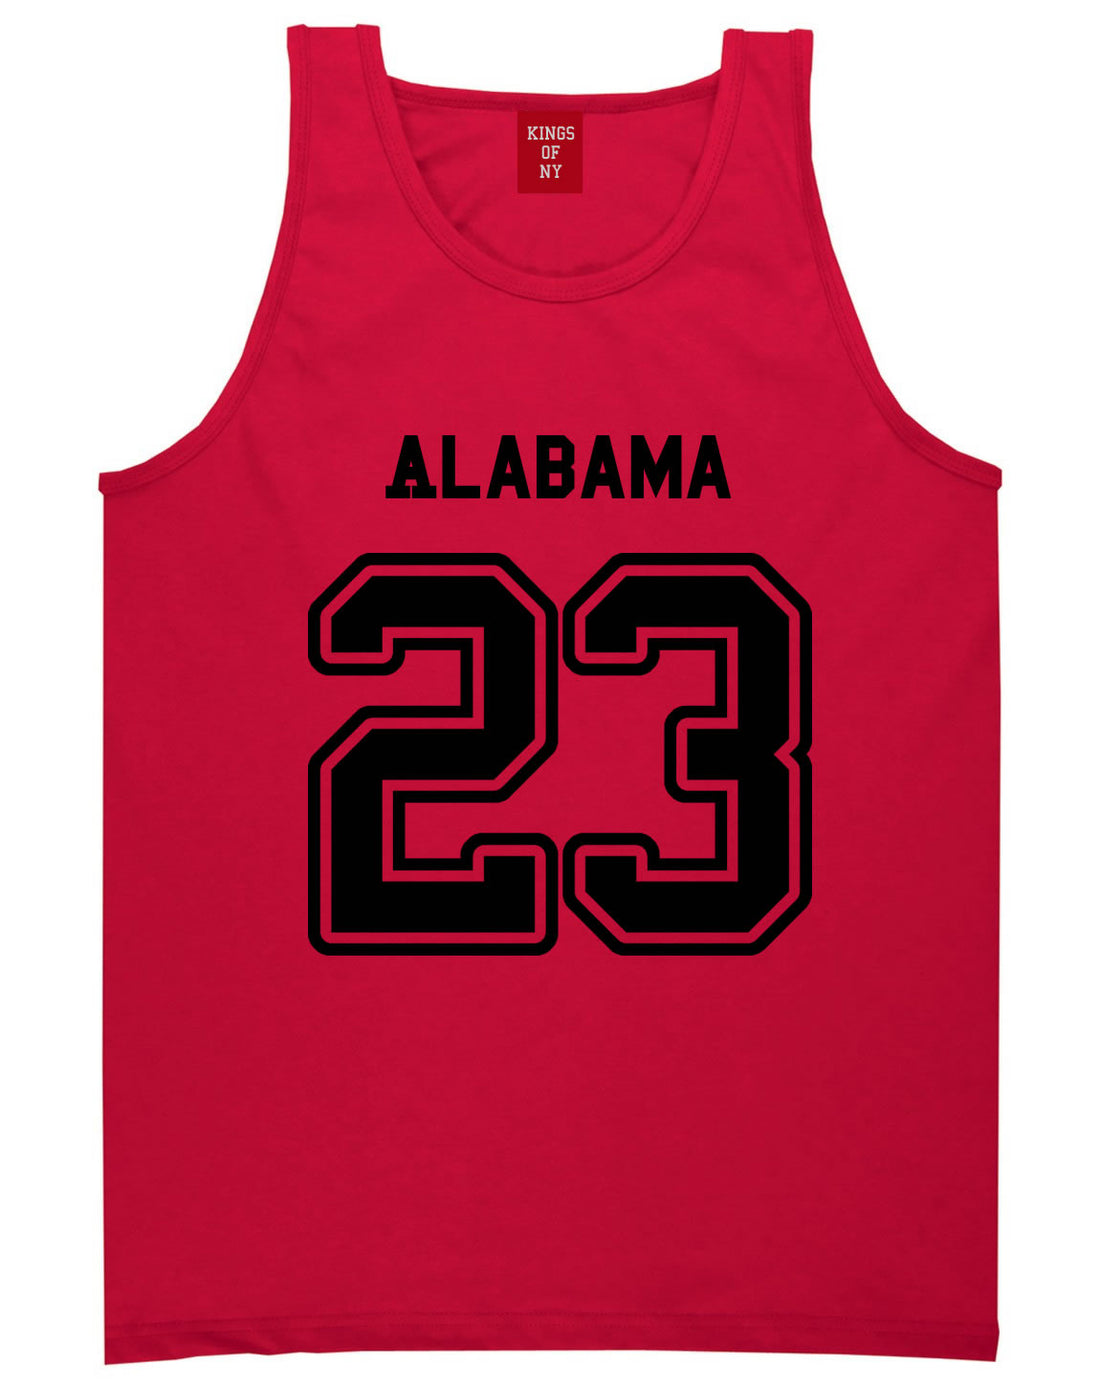 Sport Style Alabama 23 Team State Jersey Mens Tank Top By Kings Of NY